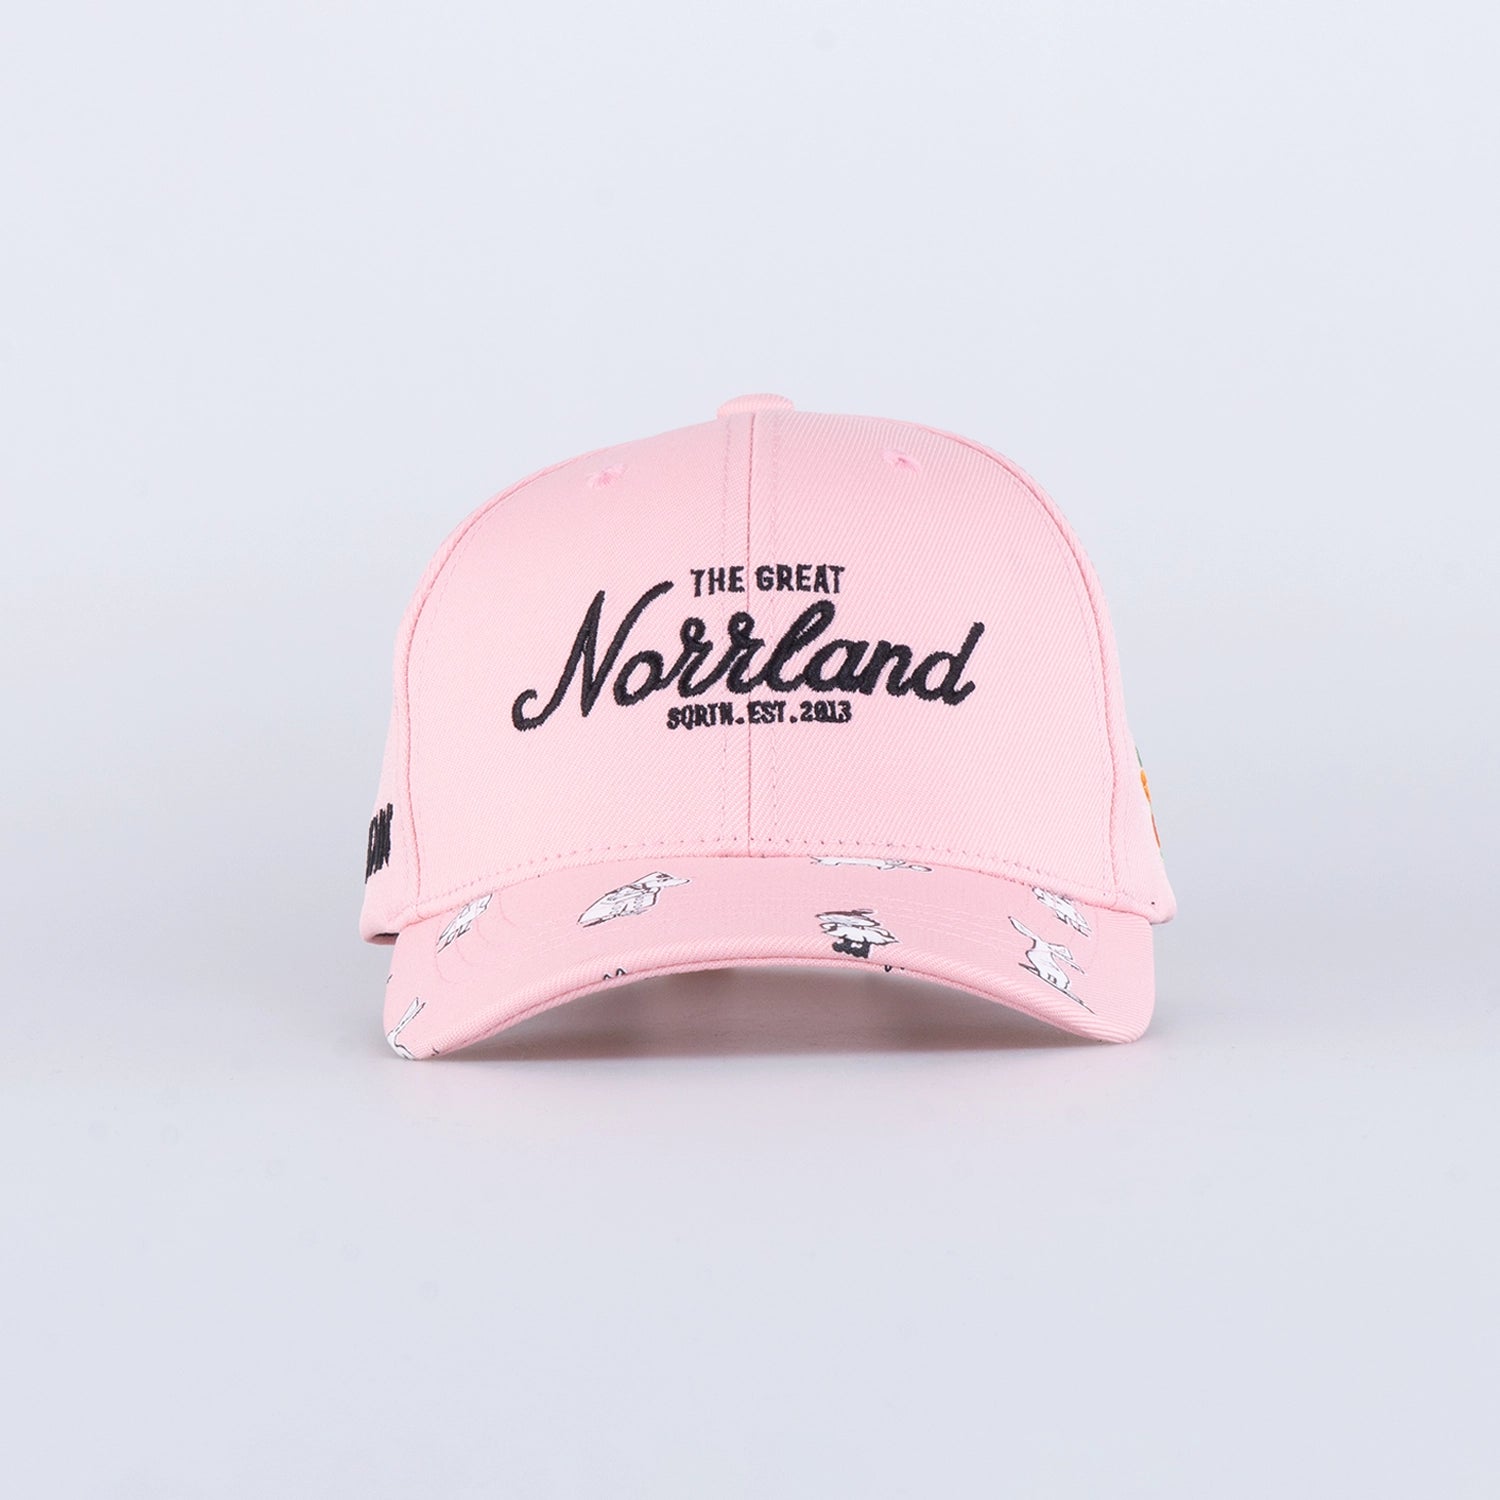 GREAT NORRLAND KIDS CAP - HOOKED MUMIN PINK